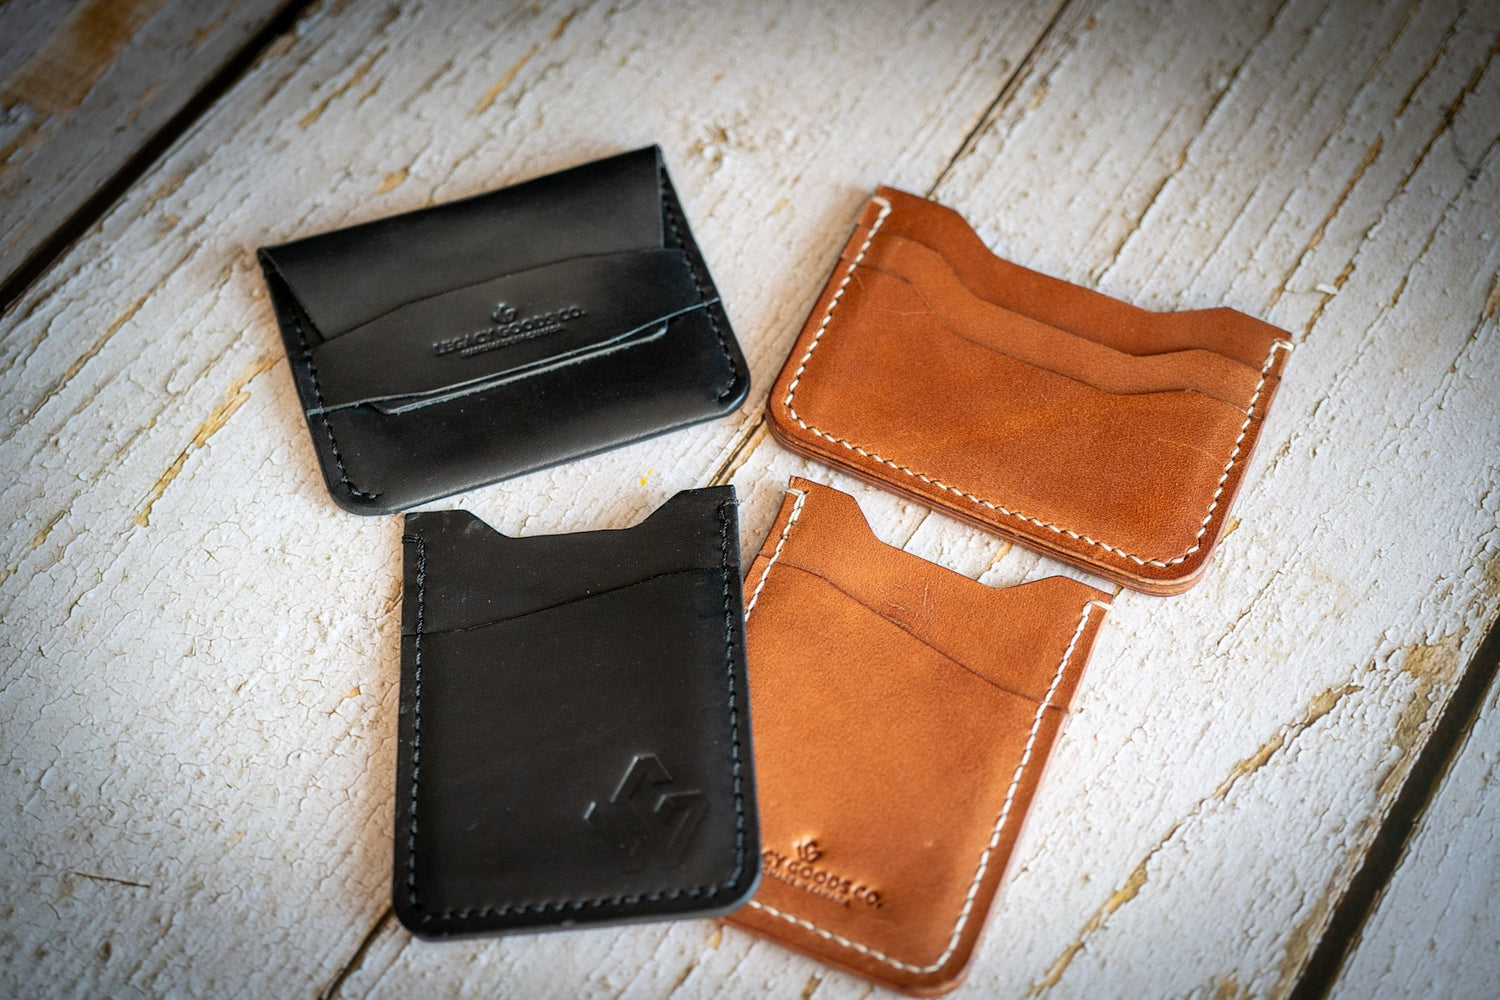 Minimalistic handcrafted leather wallets